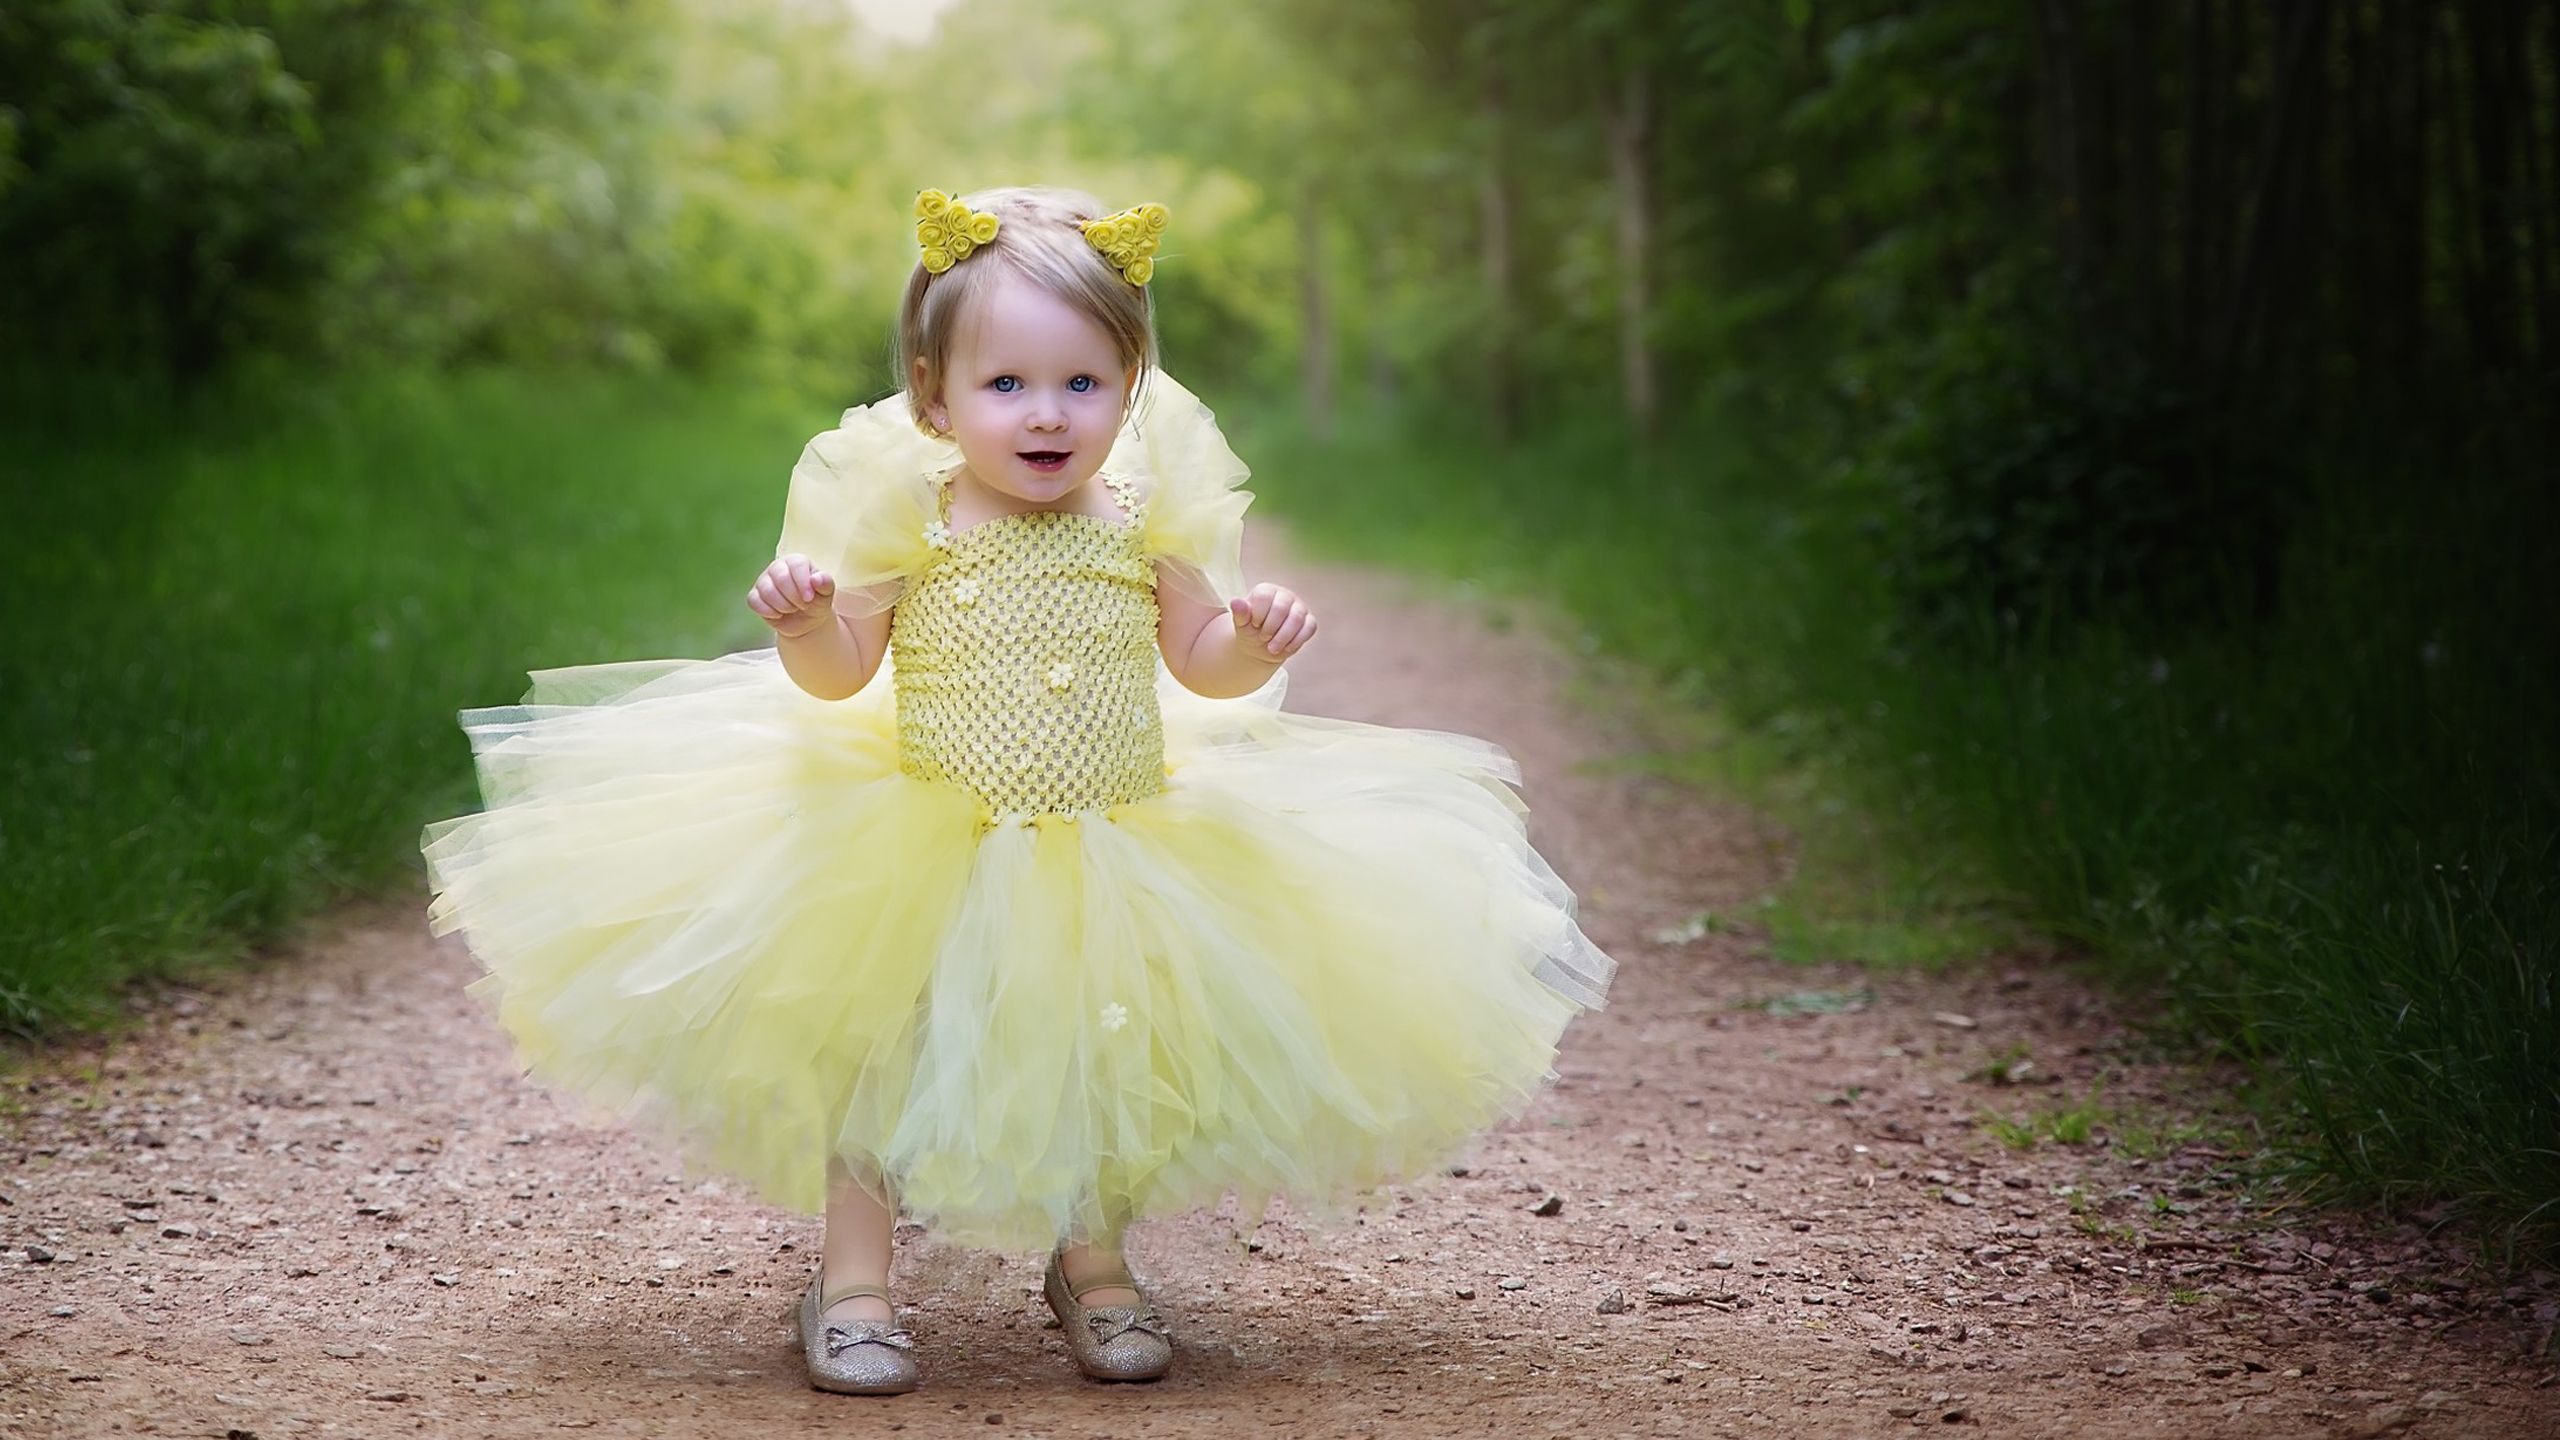 cute baby girl is wearing yellow dress standing on road in green trees background HD cute Wallpaper